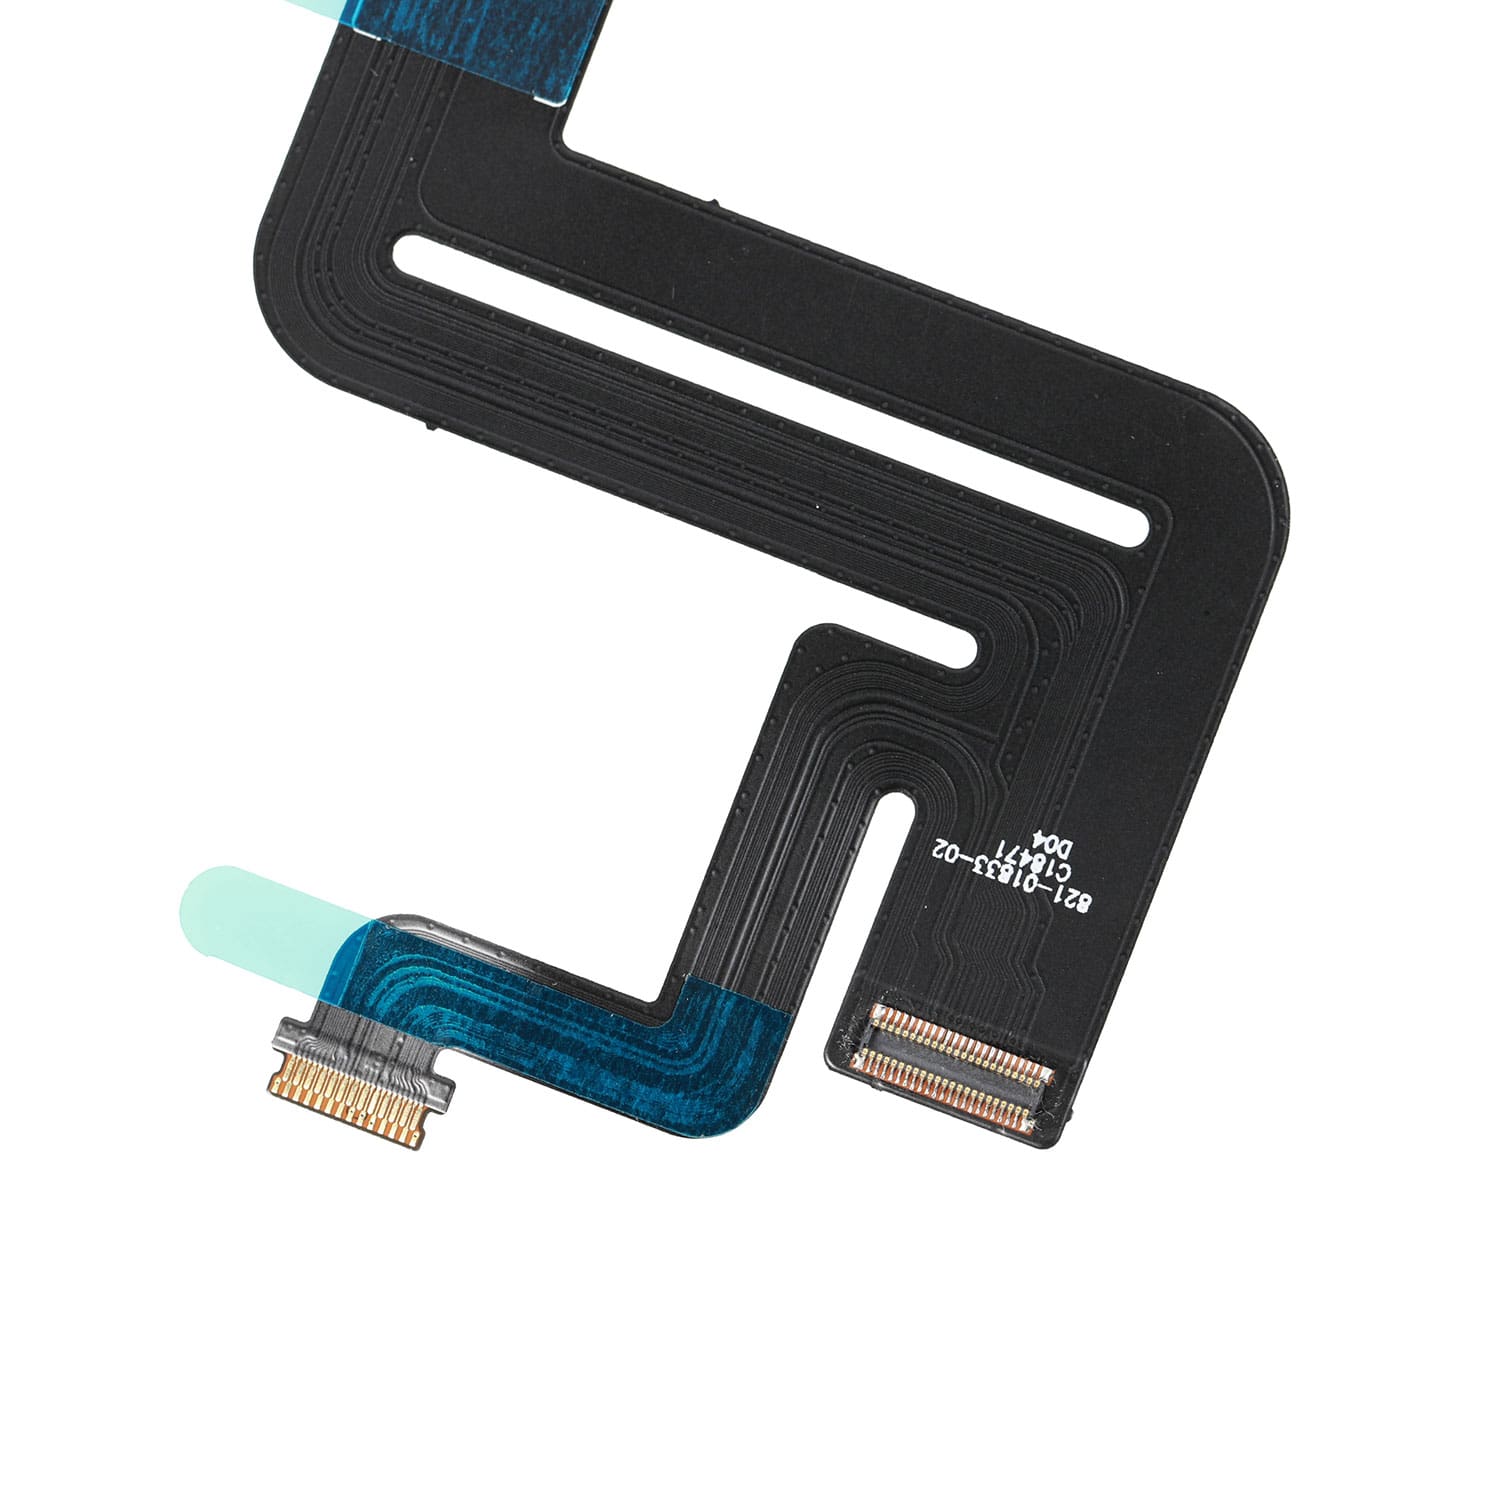 TOUCHPAD CABLE FOR MACBOOK AIR A1932 (LATE 2018-MID 2019)